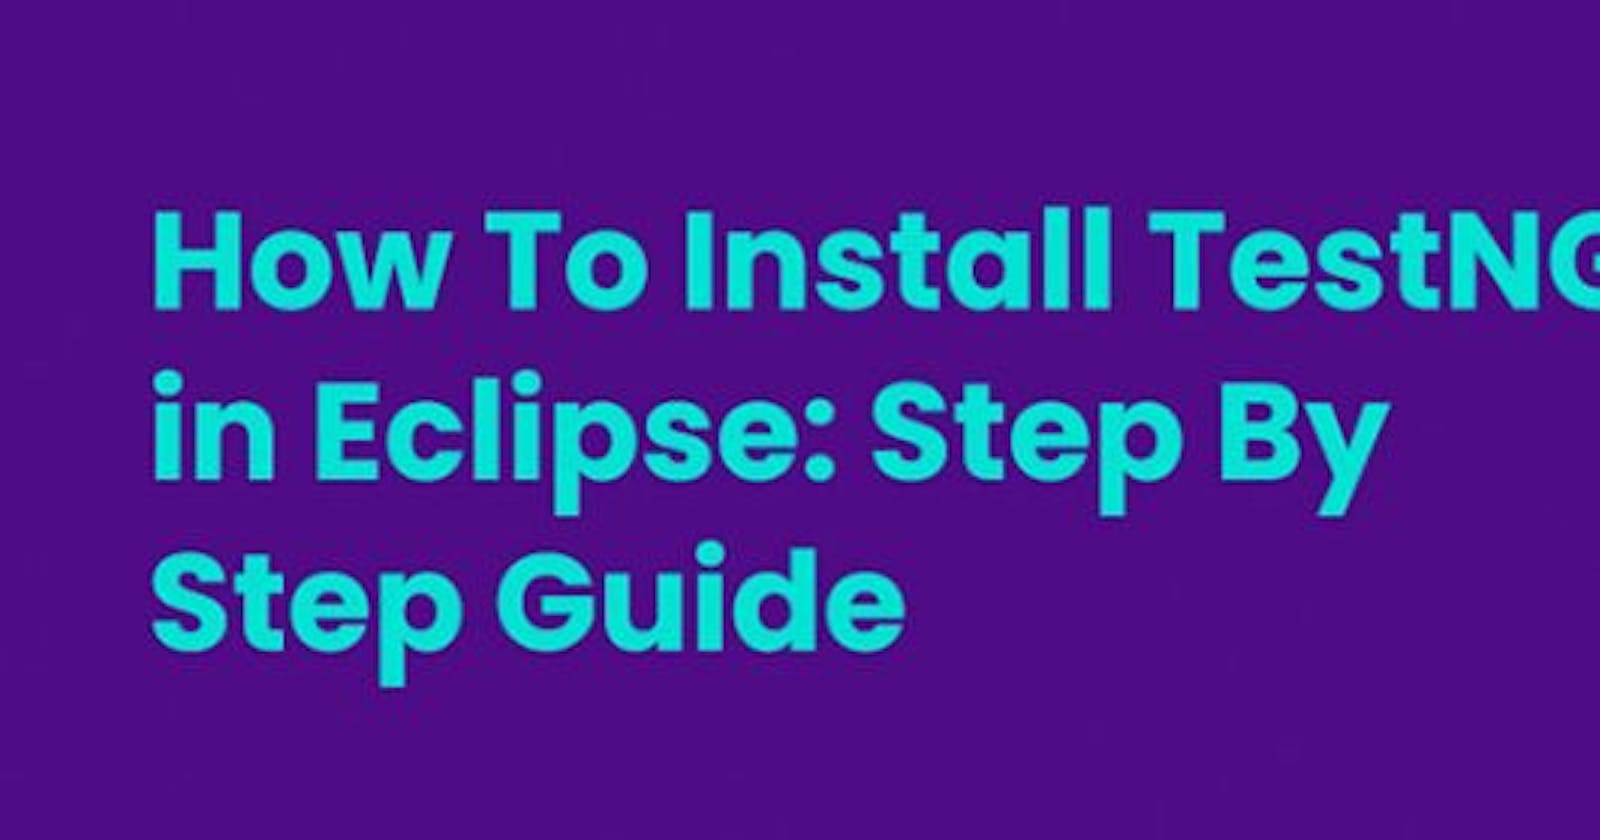 How To Install TestNG in Eclipse: Step By Step Guide